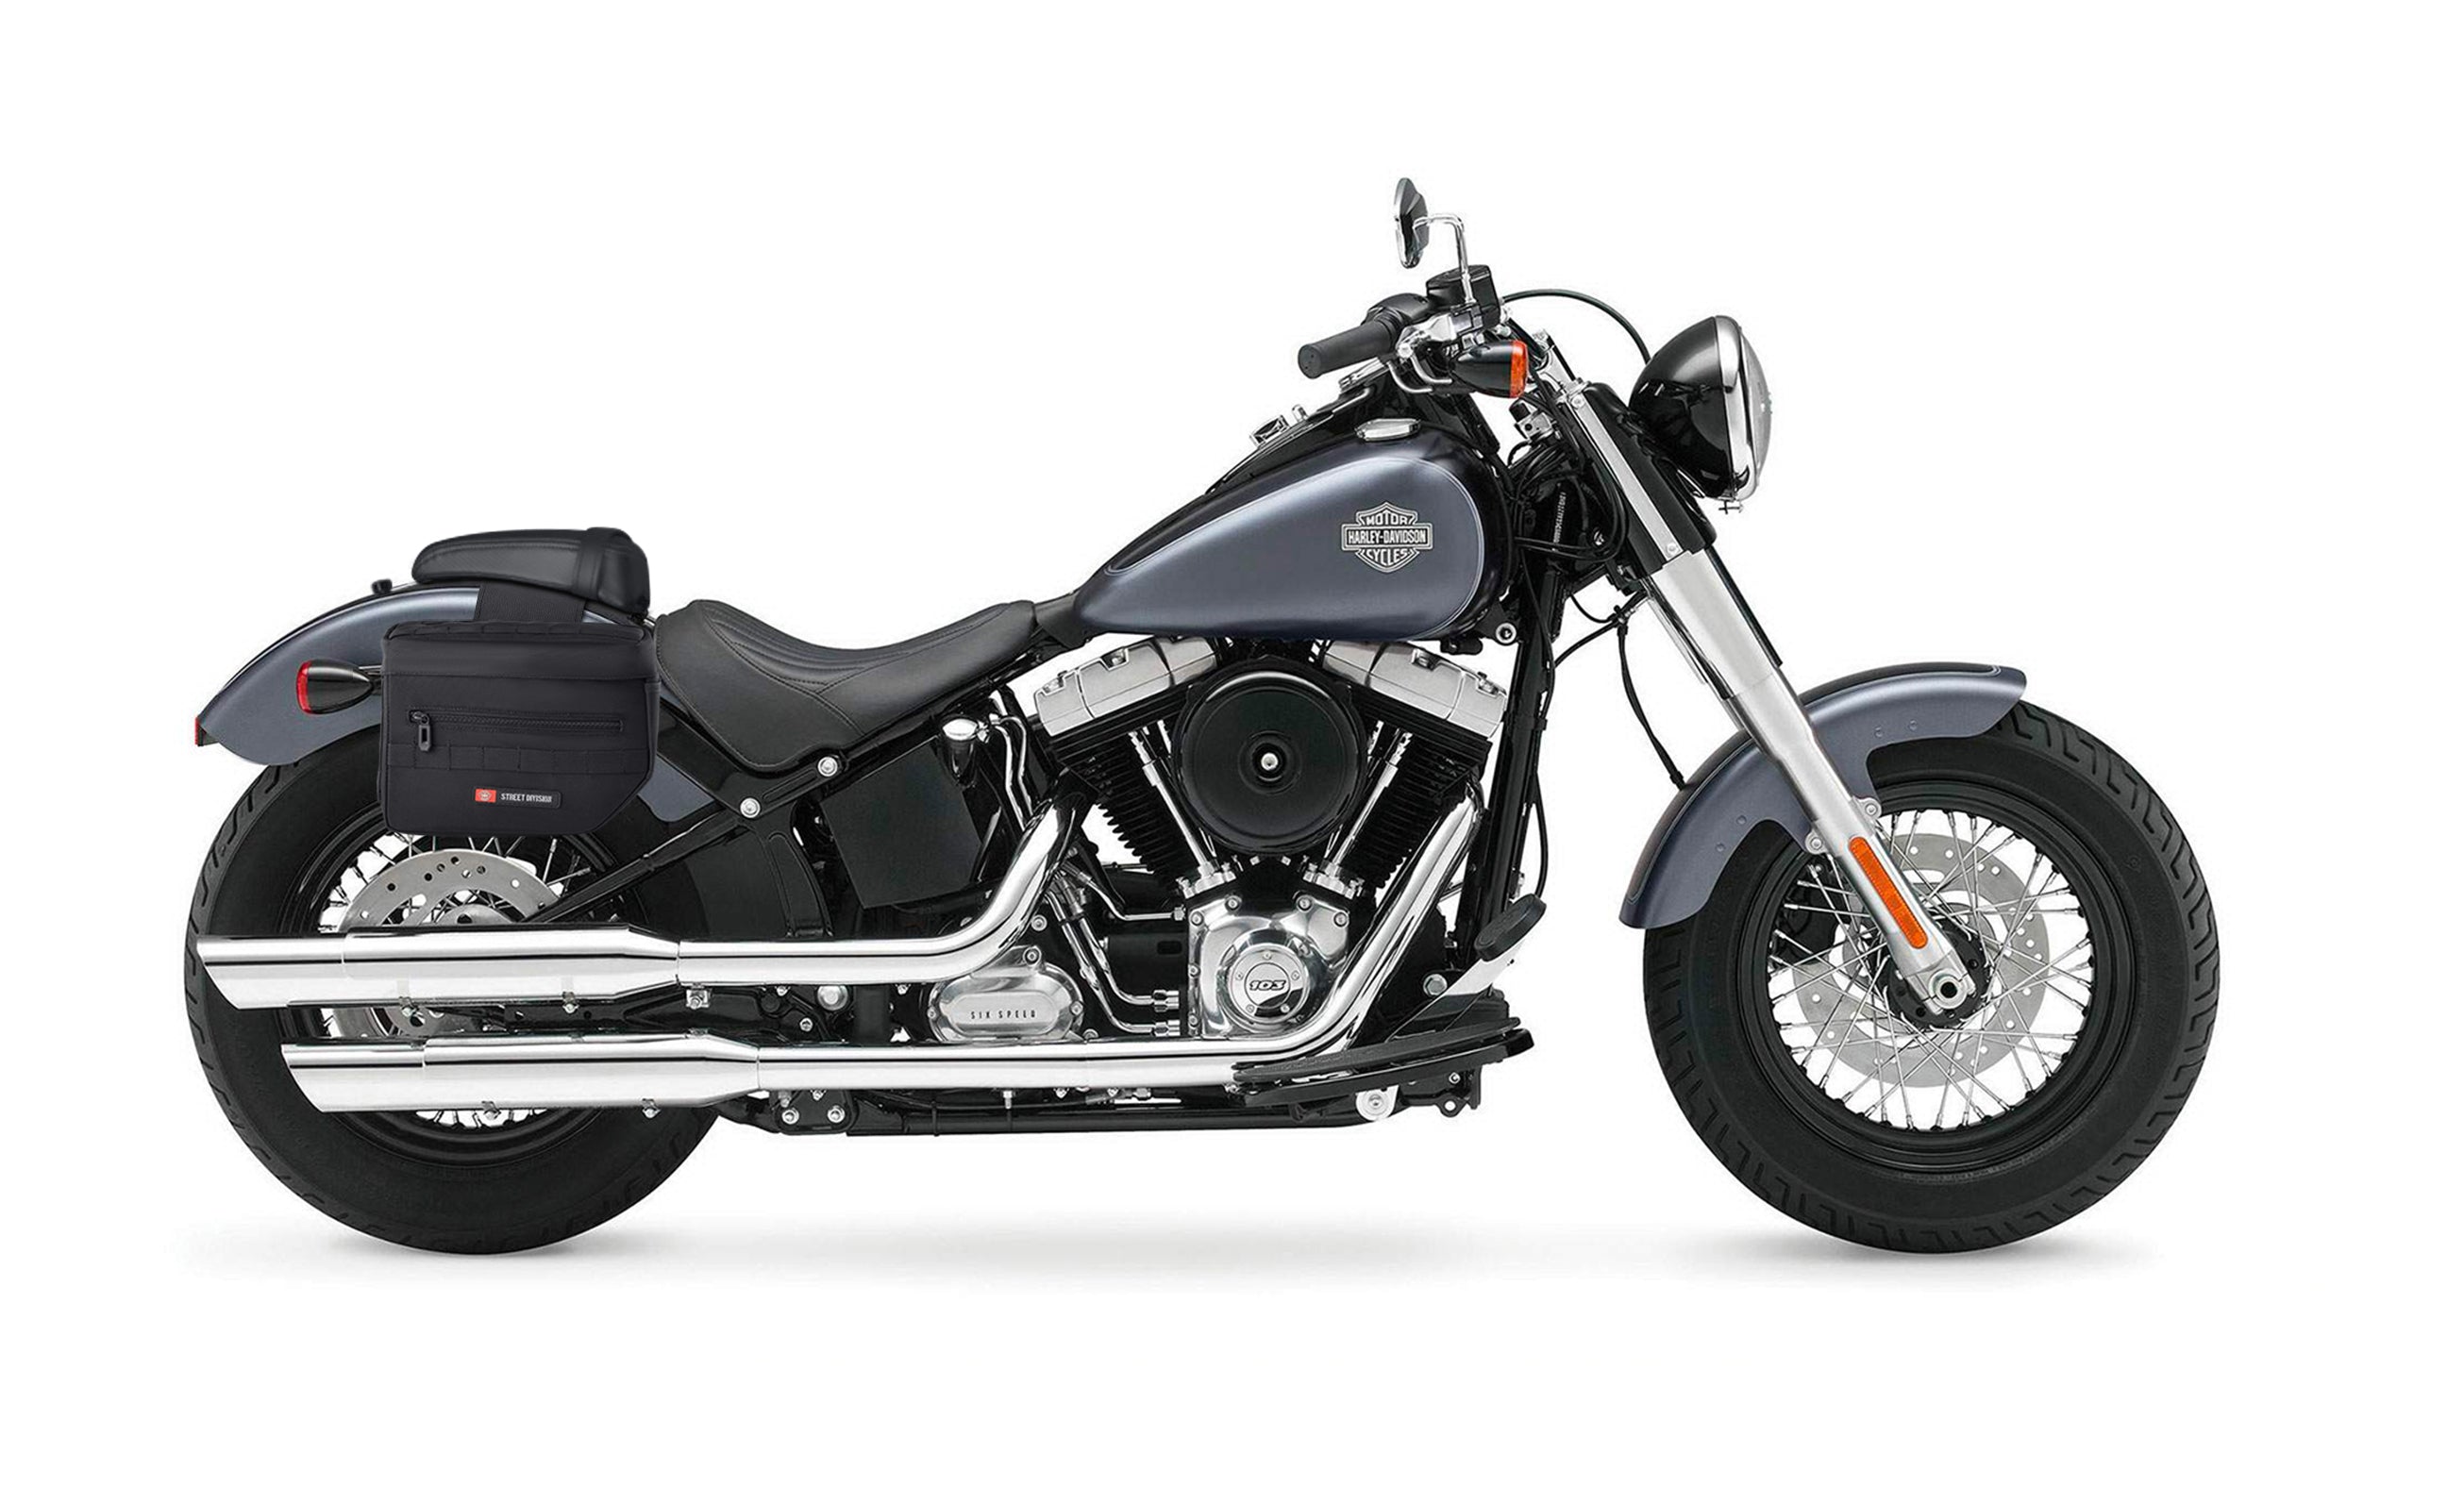 14L - Patriot Small Motorcycle Throw Over Saddlebags for Harley Softail Slim FLS on Bike Photo @expand